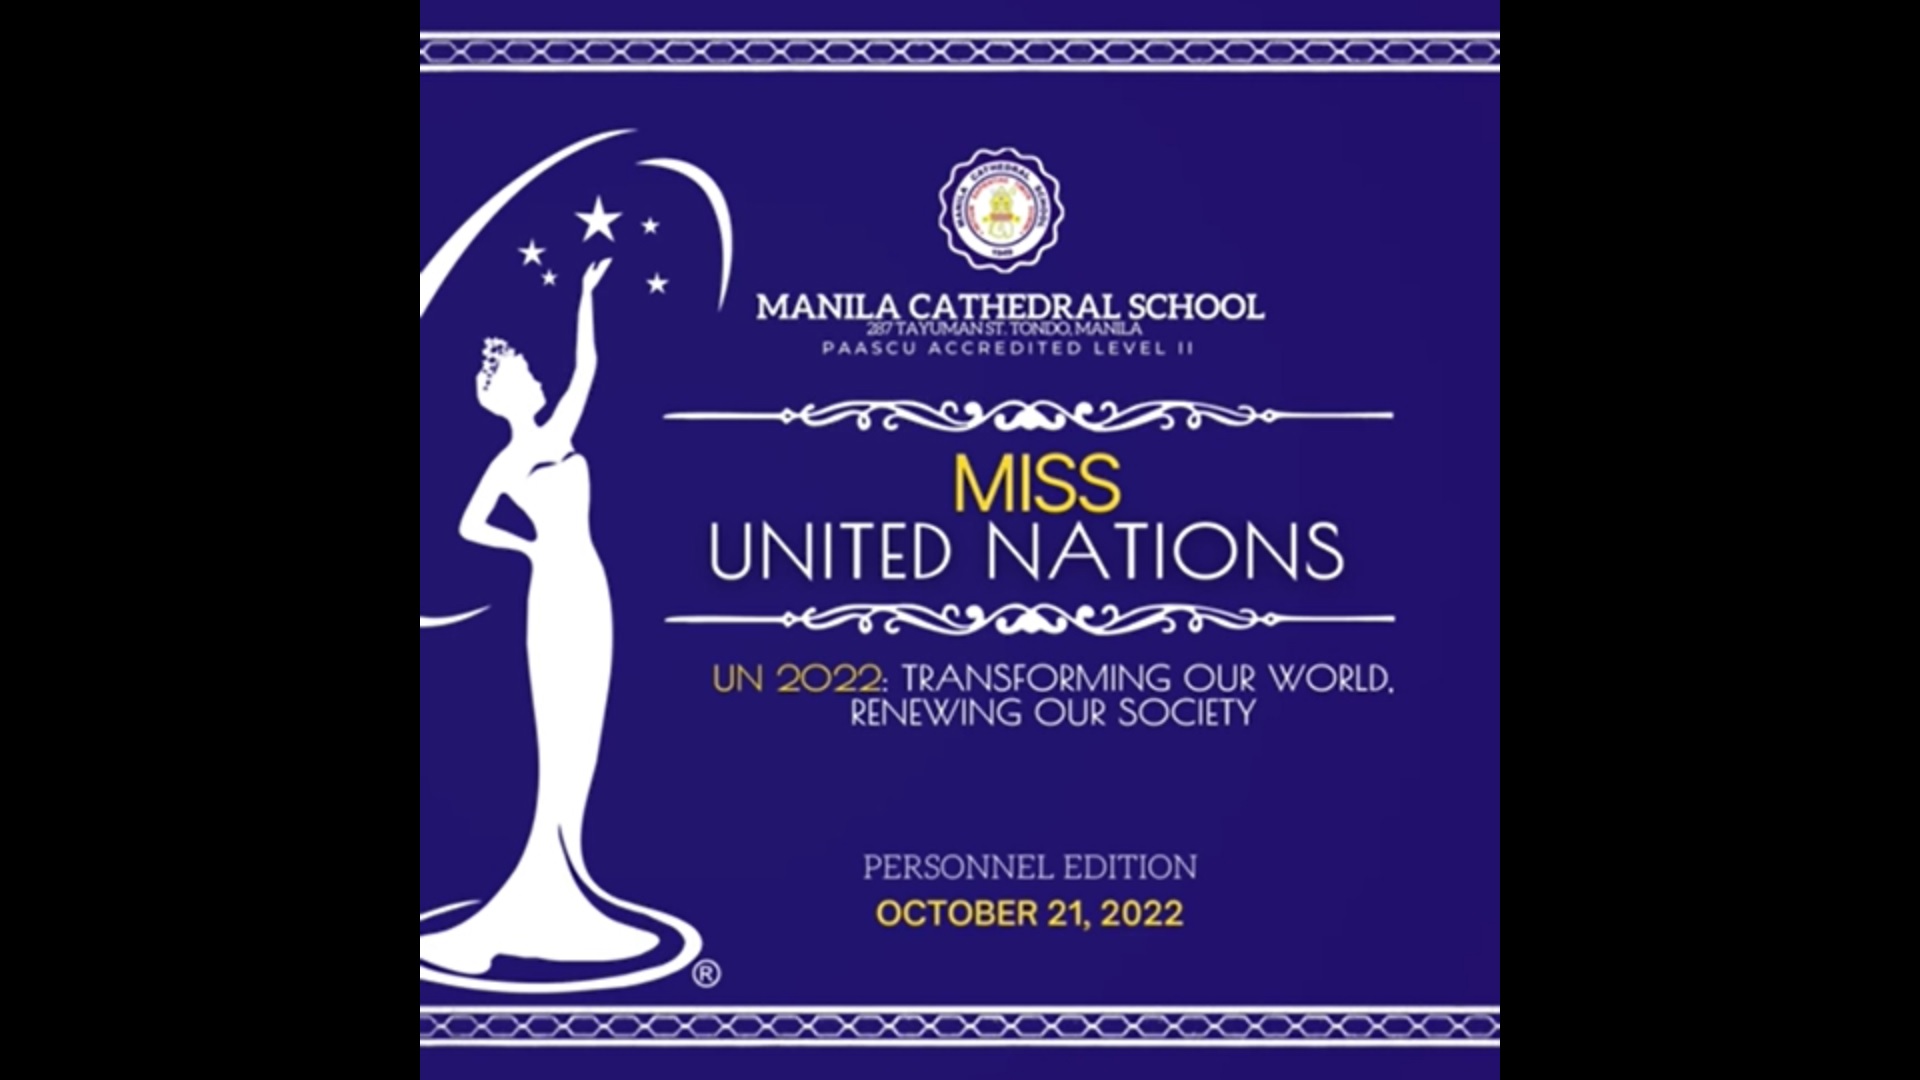 As part of Manila Cathedral School's solidarity with the celebration of the United Nations Month 2022 with the theme: Transforming our World, Renewing our Society, we gladly introduce to you the parti